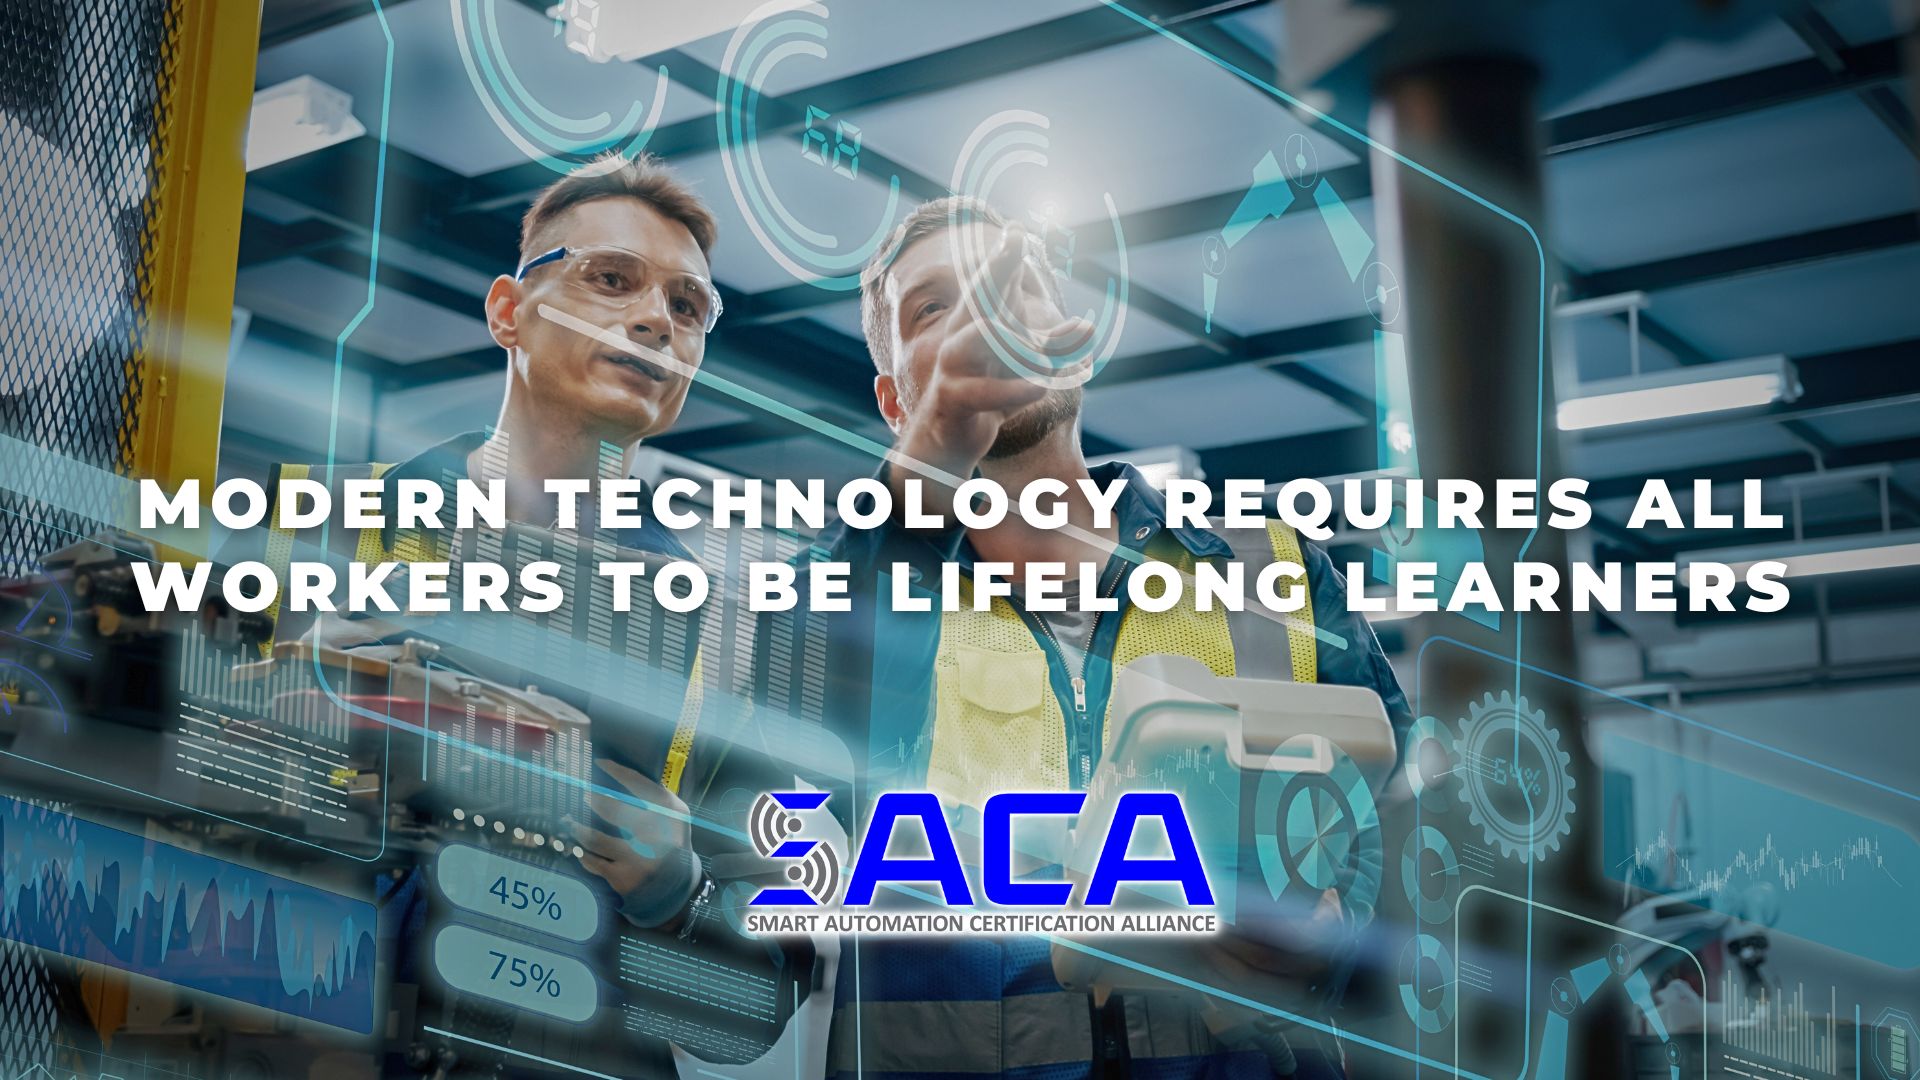 SACA - Modern Technology Requires All Workers to be Lifelong Learners